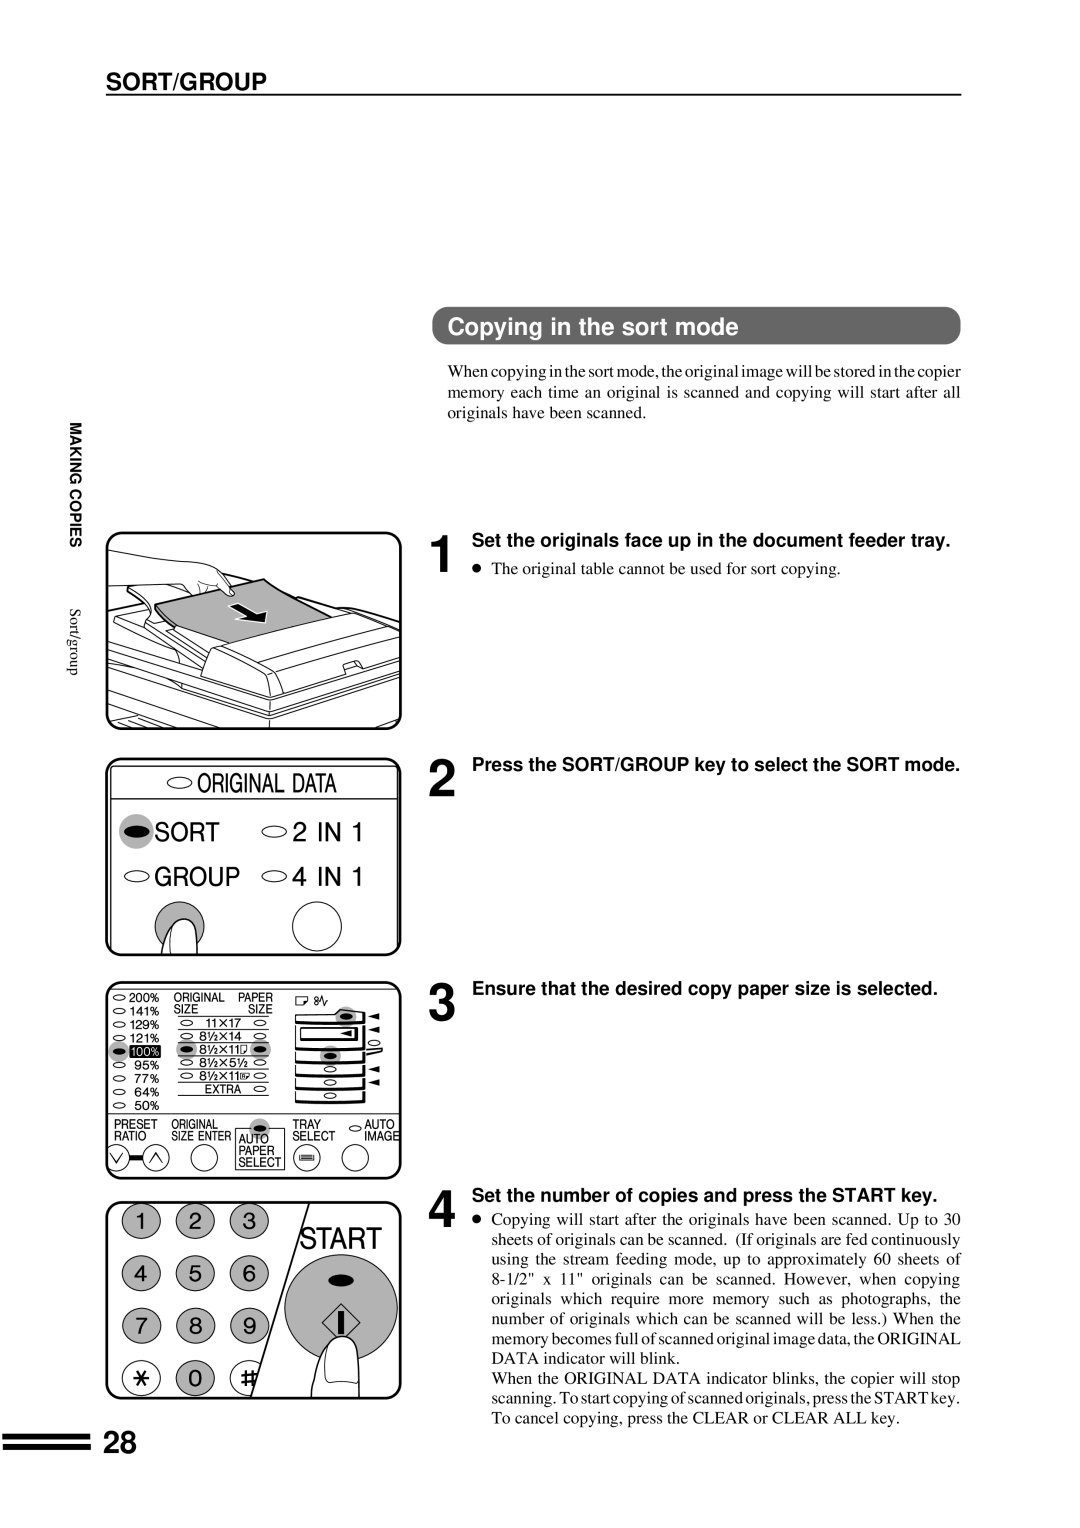 Sharp AR-207 operation manual Sort/Group, Copying in the sort mode, Press the SORT/GROUP key to select the SORT mode 